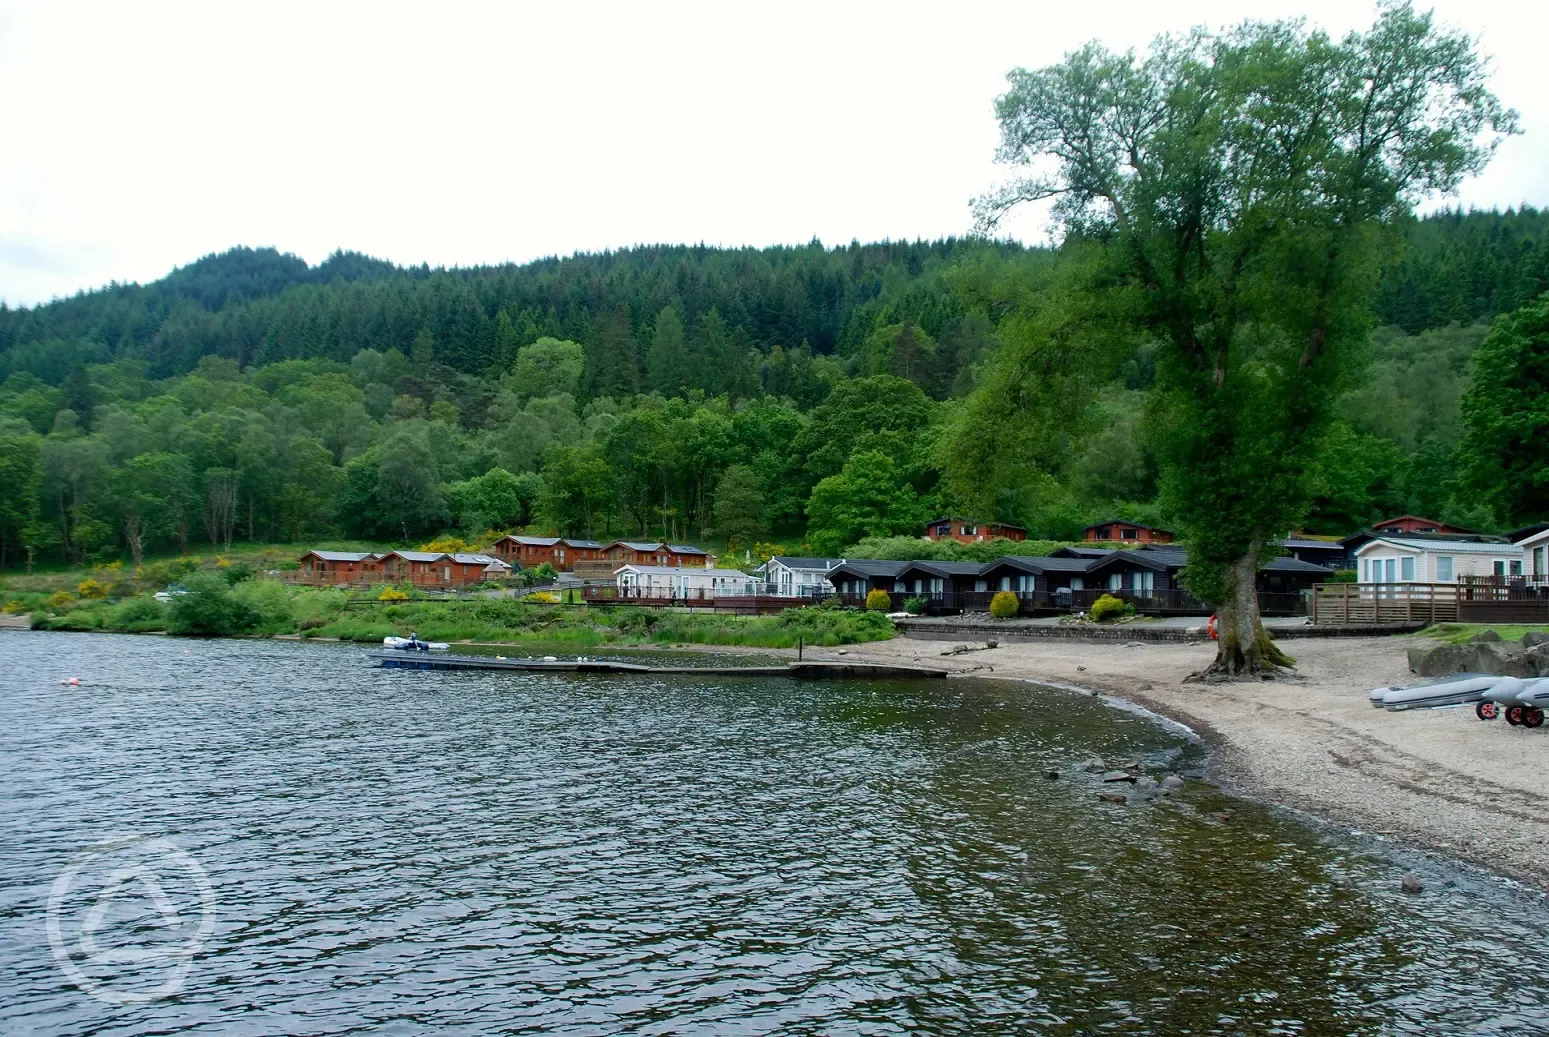 Loch Lomond Holiday Park from the water